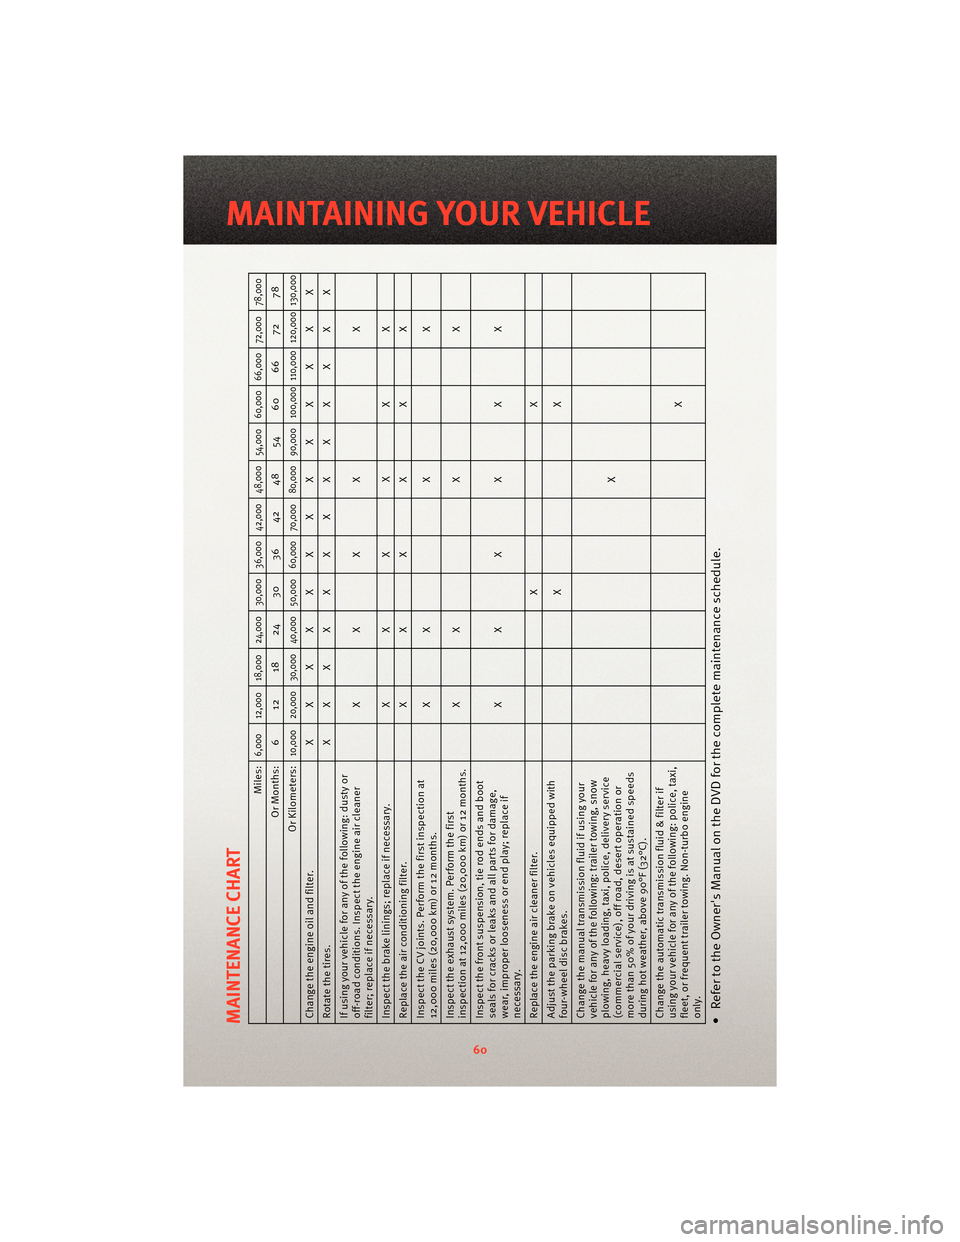 DODGE CALIBER 2010 1.G User Guide MAINTENANCE CHART
Miles:
6,000 12,000 18,000 24,000 30,000 36,000 42,000 48,000 54,000 60,000 66,000 72,000 78,000
Or Months: 6 12 18 24 30 36 42 48 54 60 66 72 78
Or Kilometers:
10,000 20,000 30,000 